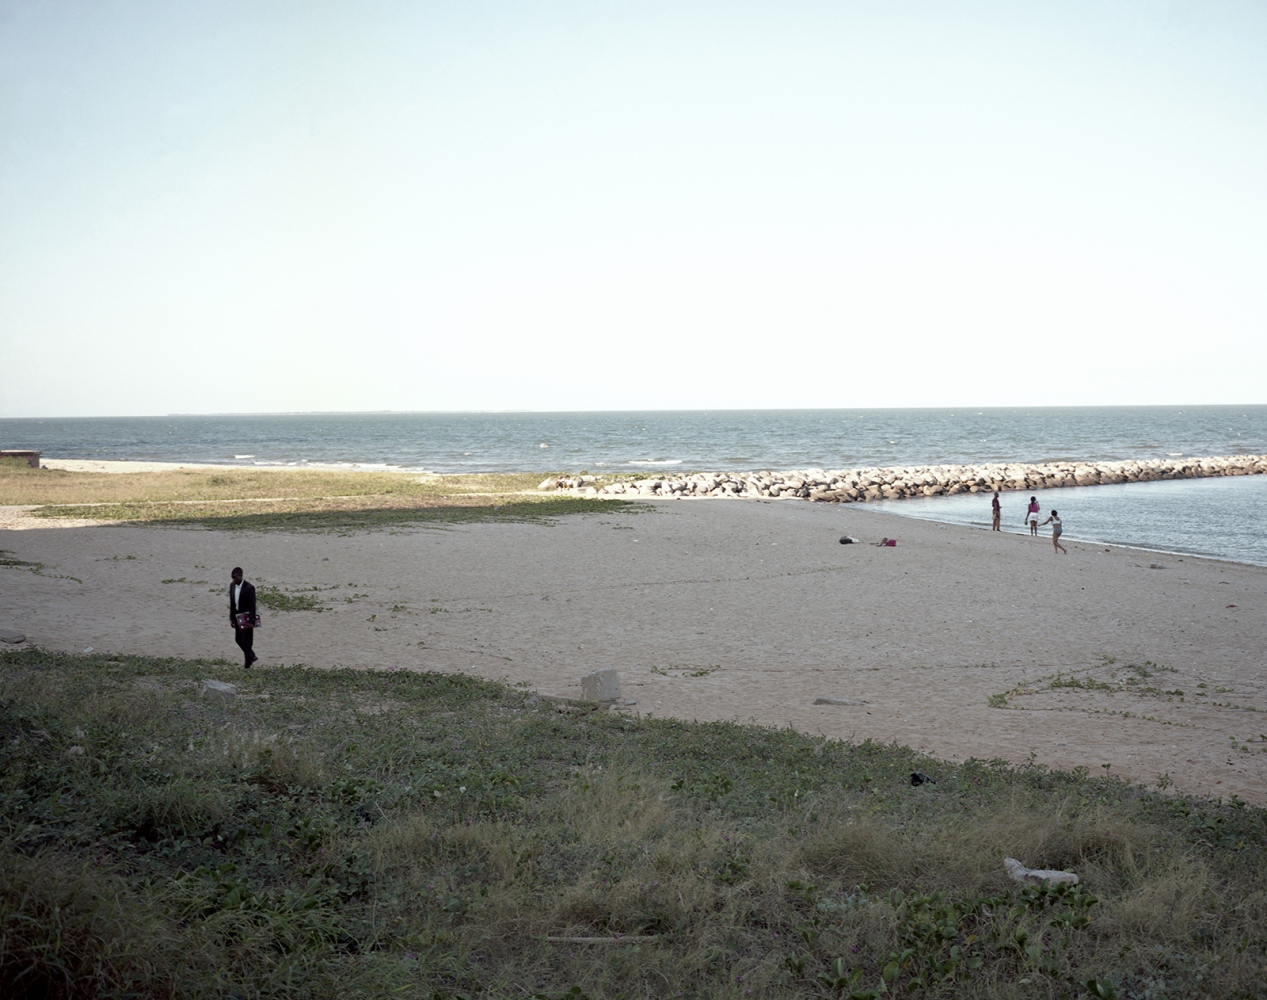  Daily-life on the beach close to the seaside road of Maputo. The project cost was US$ 315 millions and it has still to be paid by the State, also the high speed road and the absence of bridges to cross the road increase the number of car accidents involving pedestrians. 